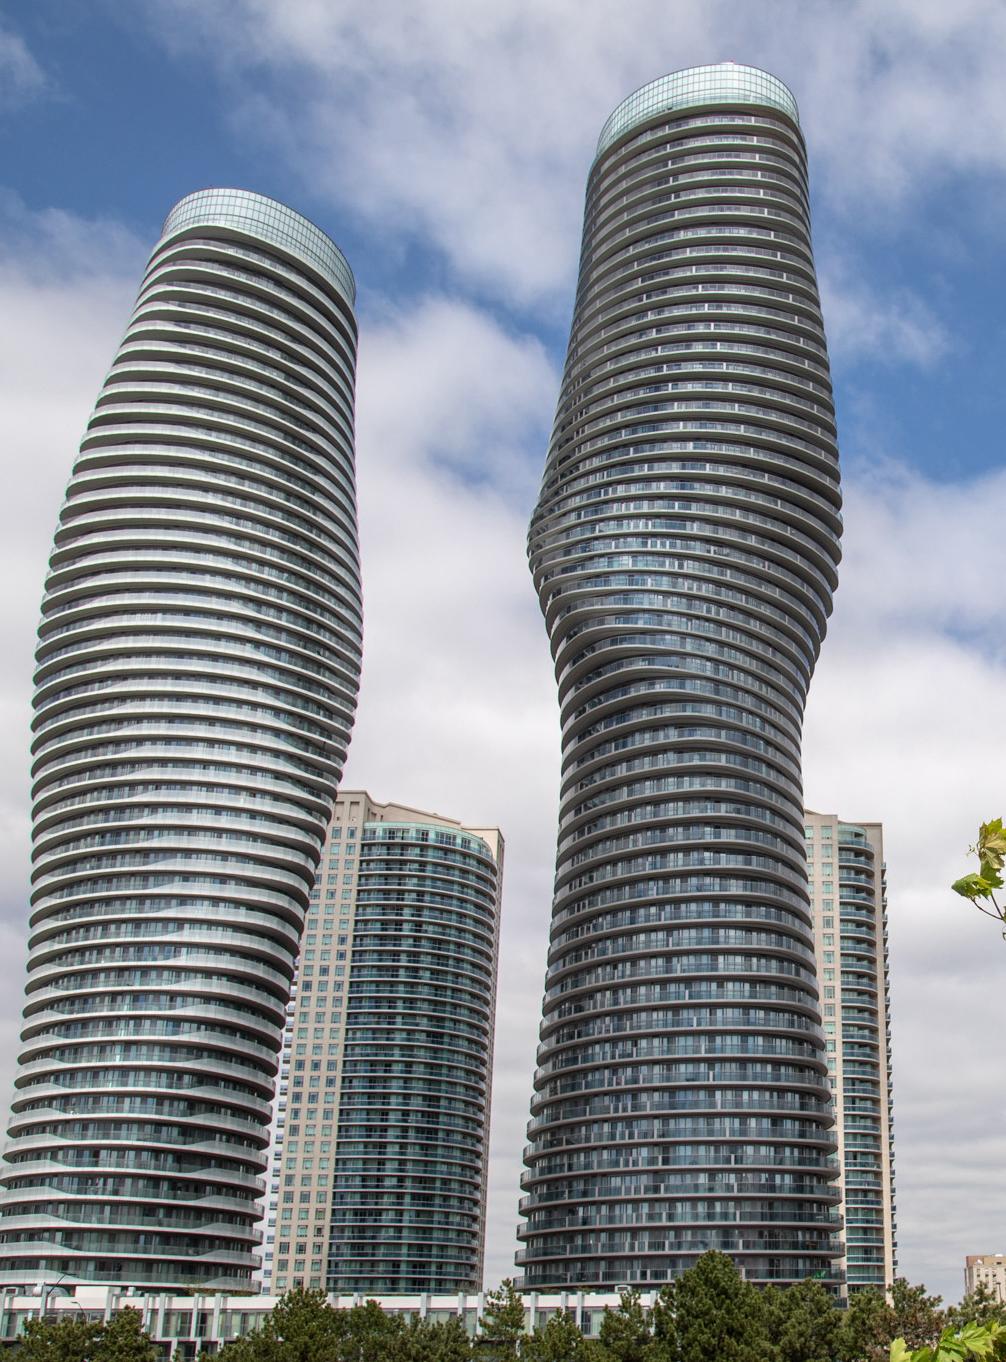 Twisting towers of Mississauga under a cloudy sky, showcasing CPM's robust moving services in urban landscapes.